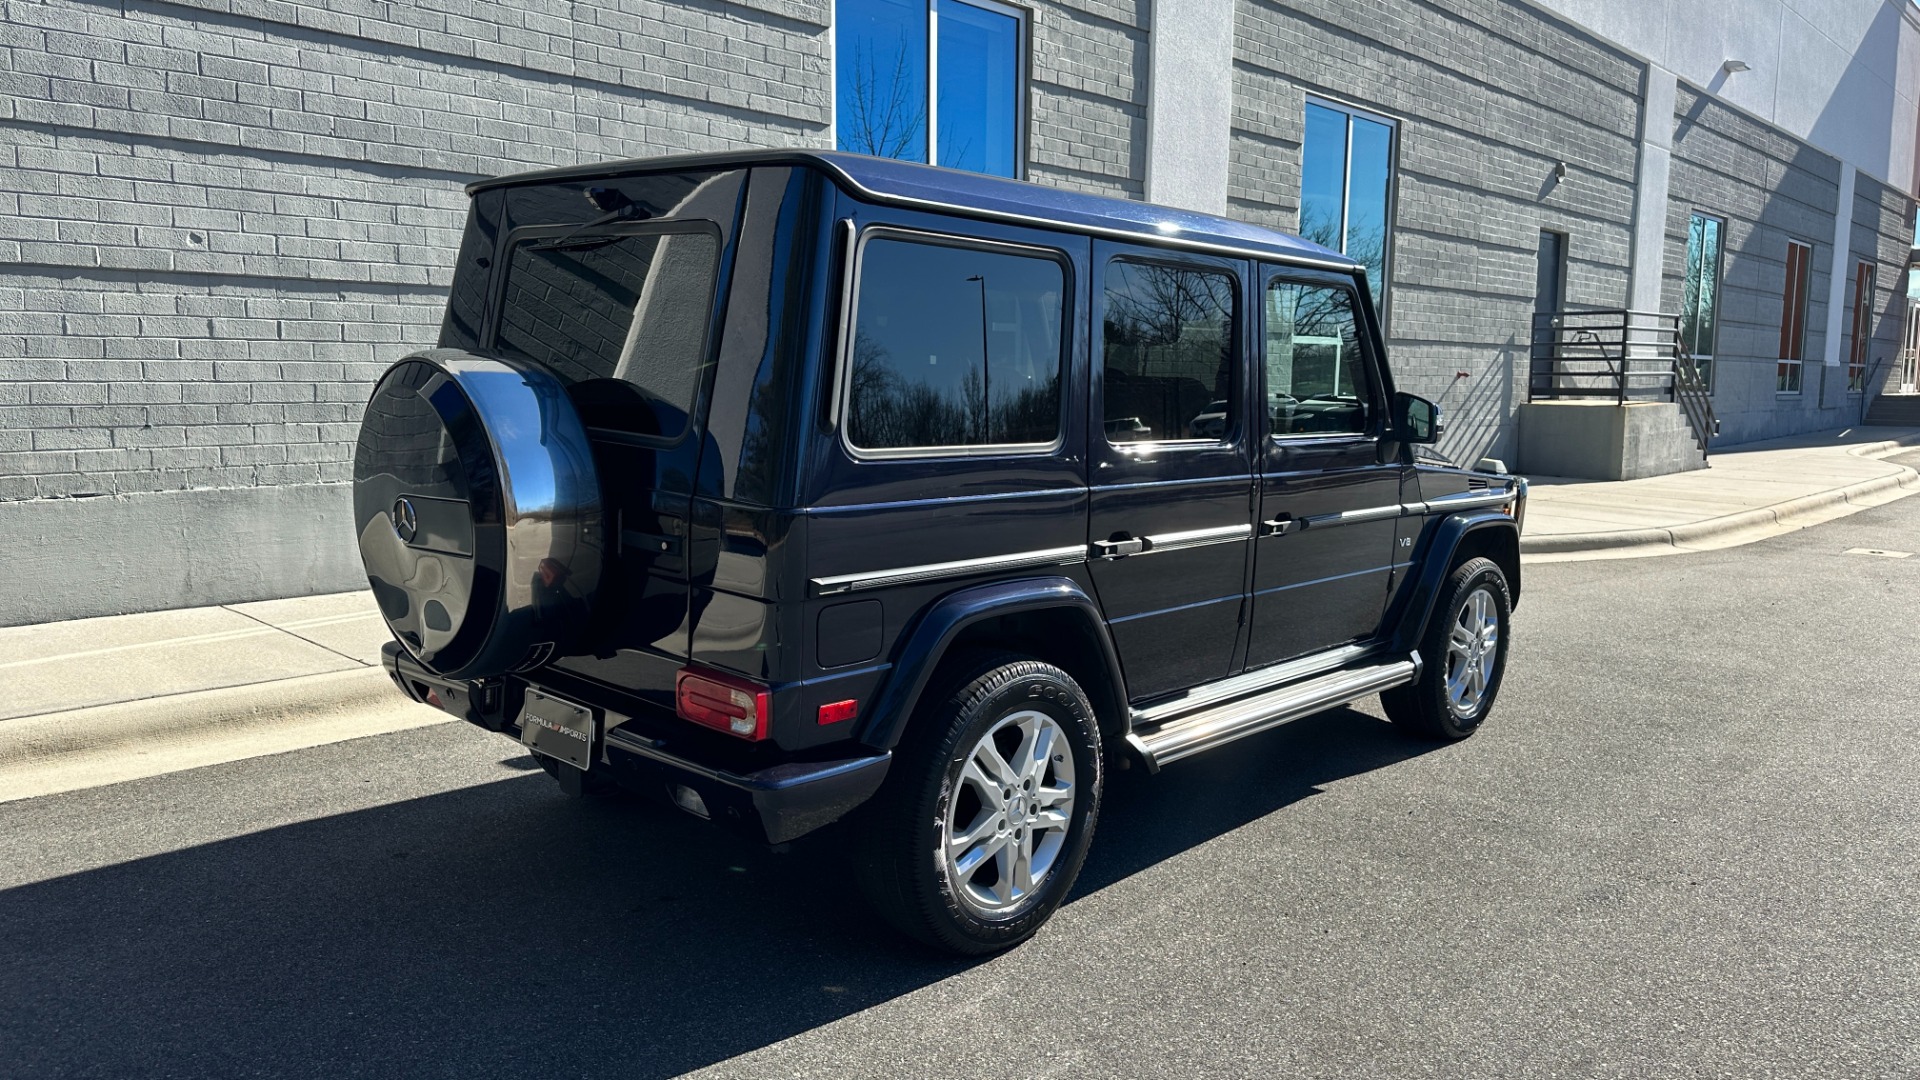 Used 2015 Mercedes-Benz G-Class G550 / DESIGNO NAPPA LEATHER / DESIGNO HEADLINER / HEATED STEERING / NAV /  for sale Sold at Formula Imports in Charlotte NC 28227 4